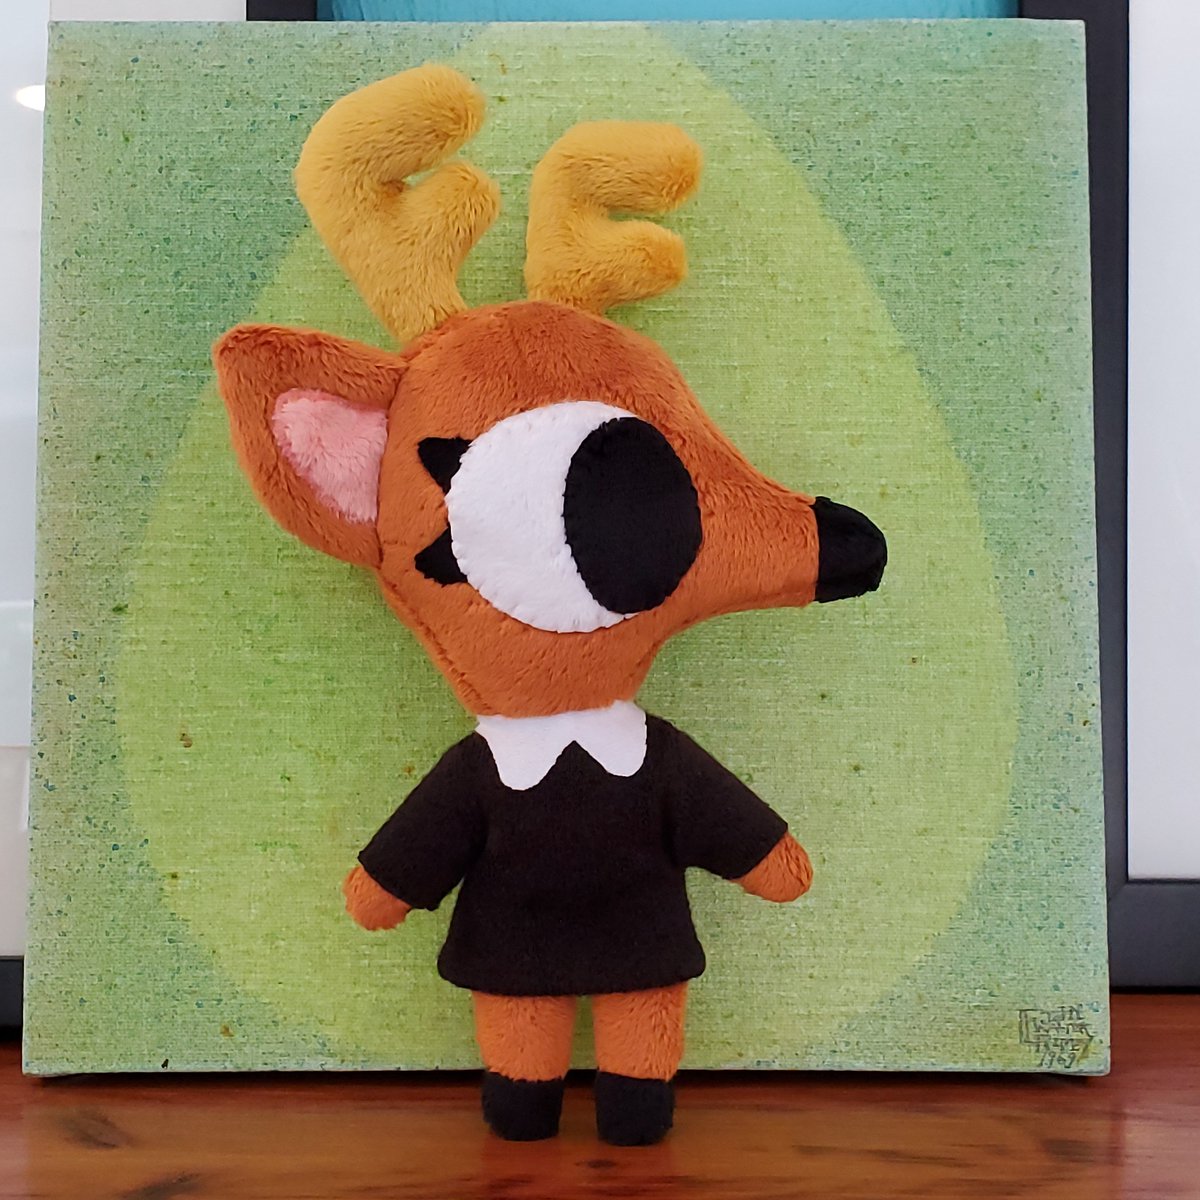 The Rae the Doe Plush Kickstarter is now LIVE!! Making a stuffed animal of one of my characters has been a dream ever since I was a little kid, so by backing this Kickstarter you're helping a dream come true. Thank you everyone!! https://www.kickstarter.com/projects/raethedoe/rae-the-doe-and-mimi-the-skunk-plushes